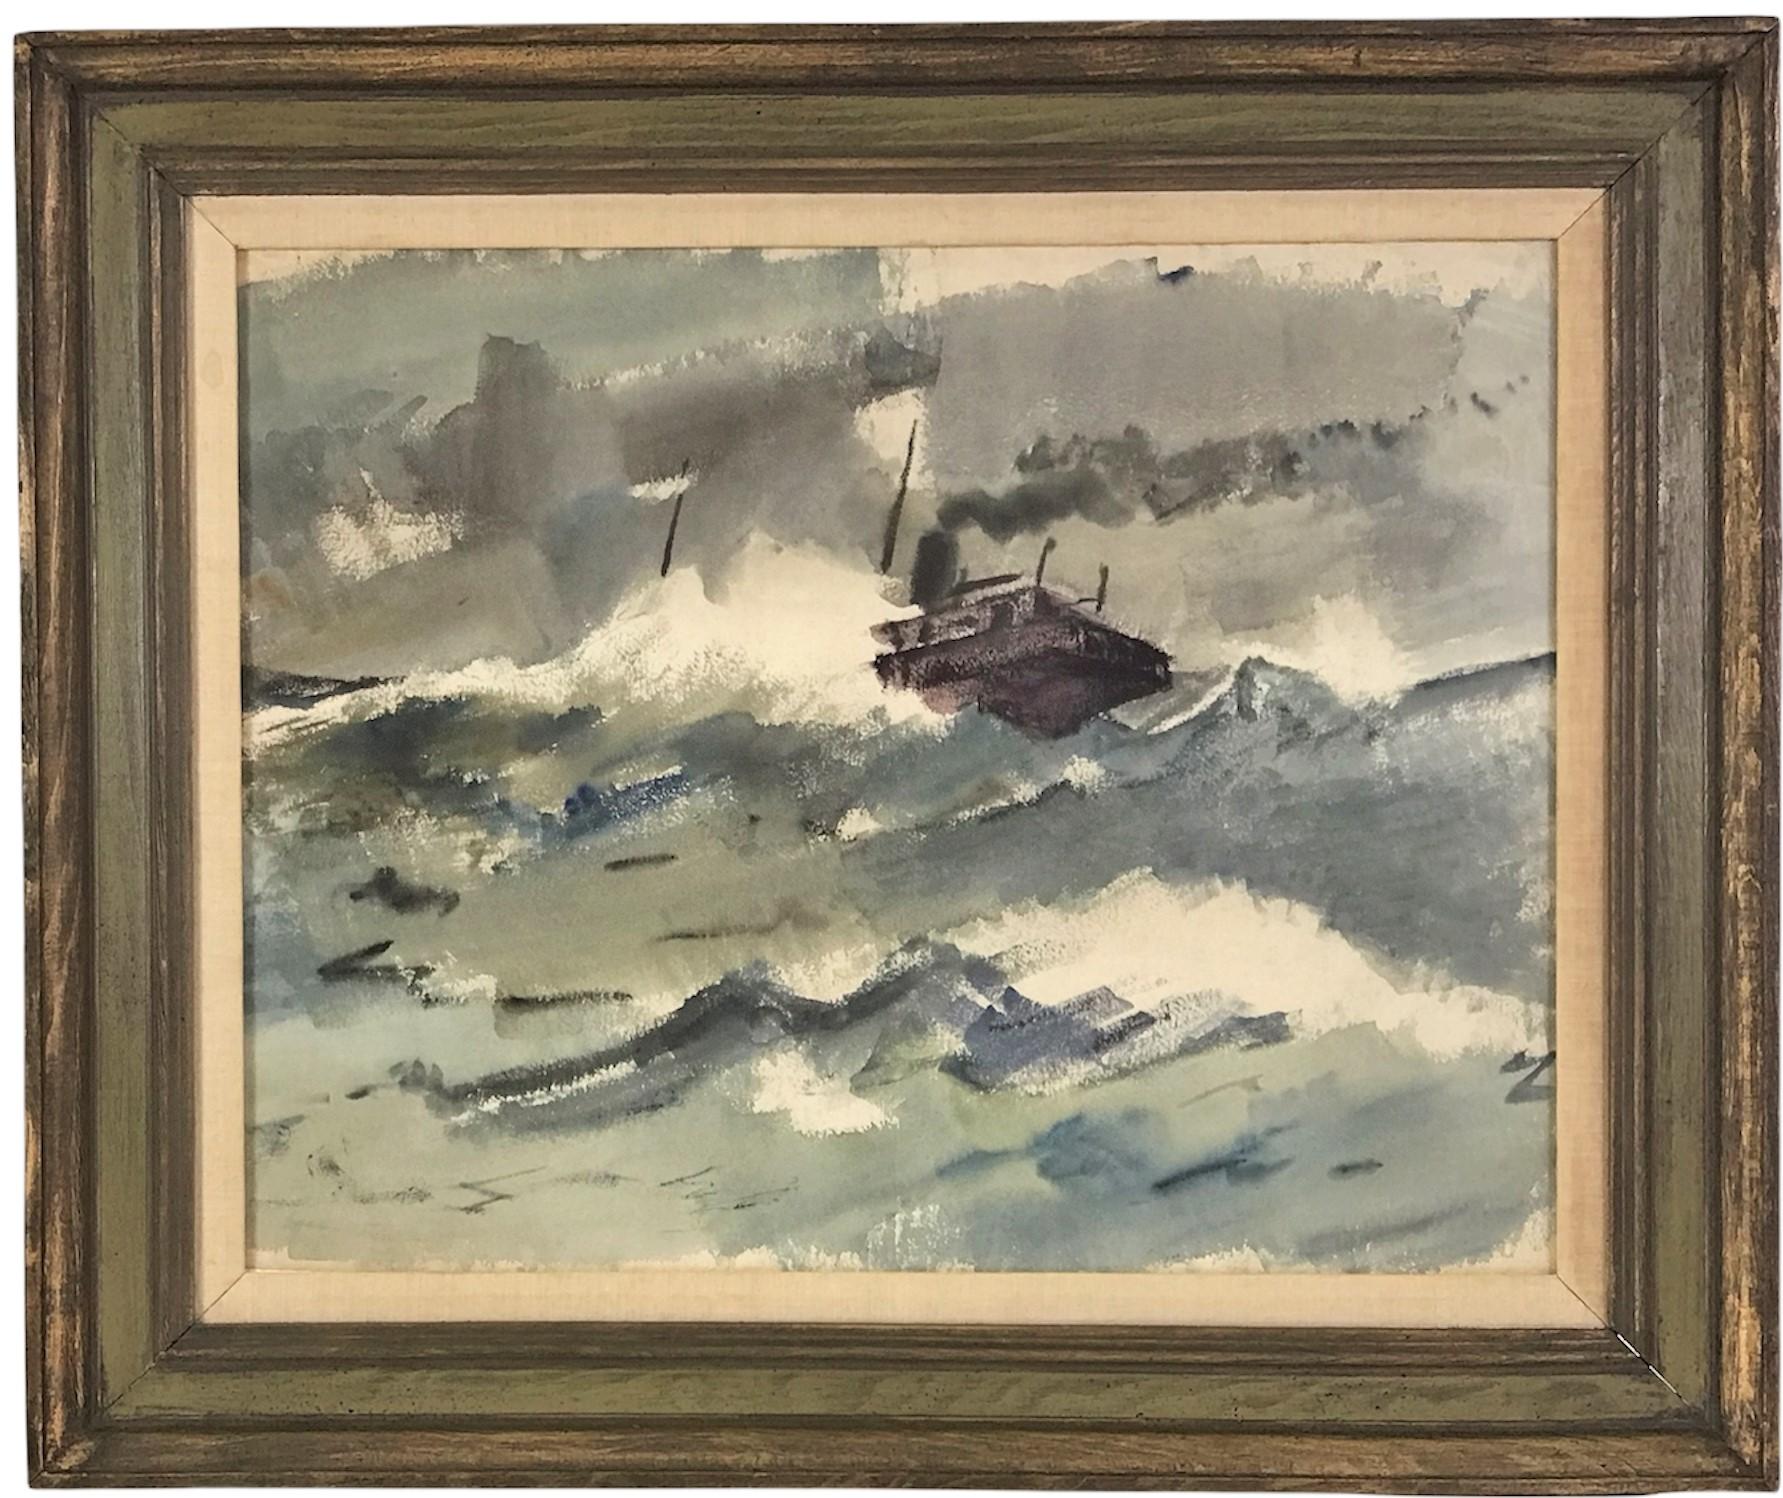 Casein on paper artwork by 1950s unknown NYC Artist depicting a steam ship dealing with a stormy day at sea.  Soft shades of grays and light blues gives a feeling of a serene picture but the dark brown color of the ship and rough sea brings the